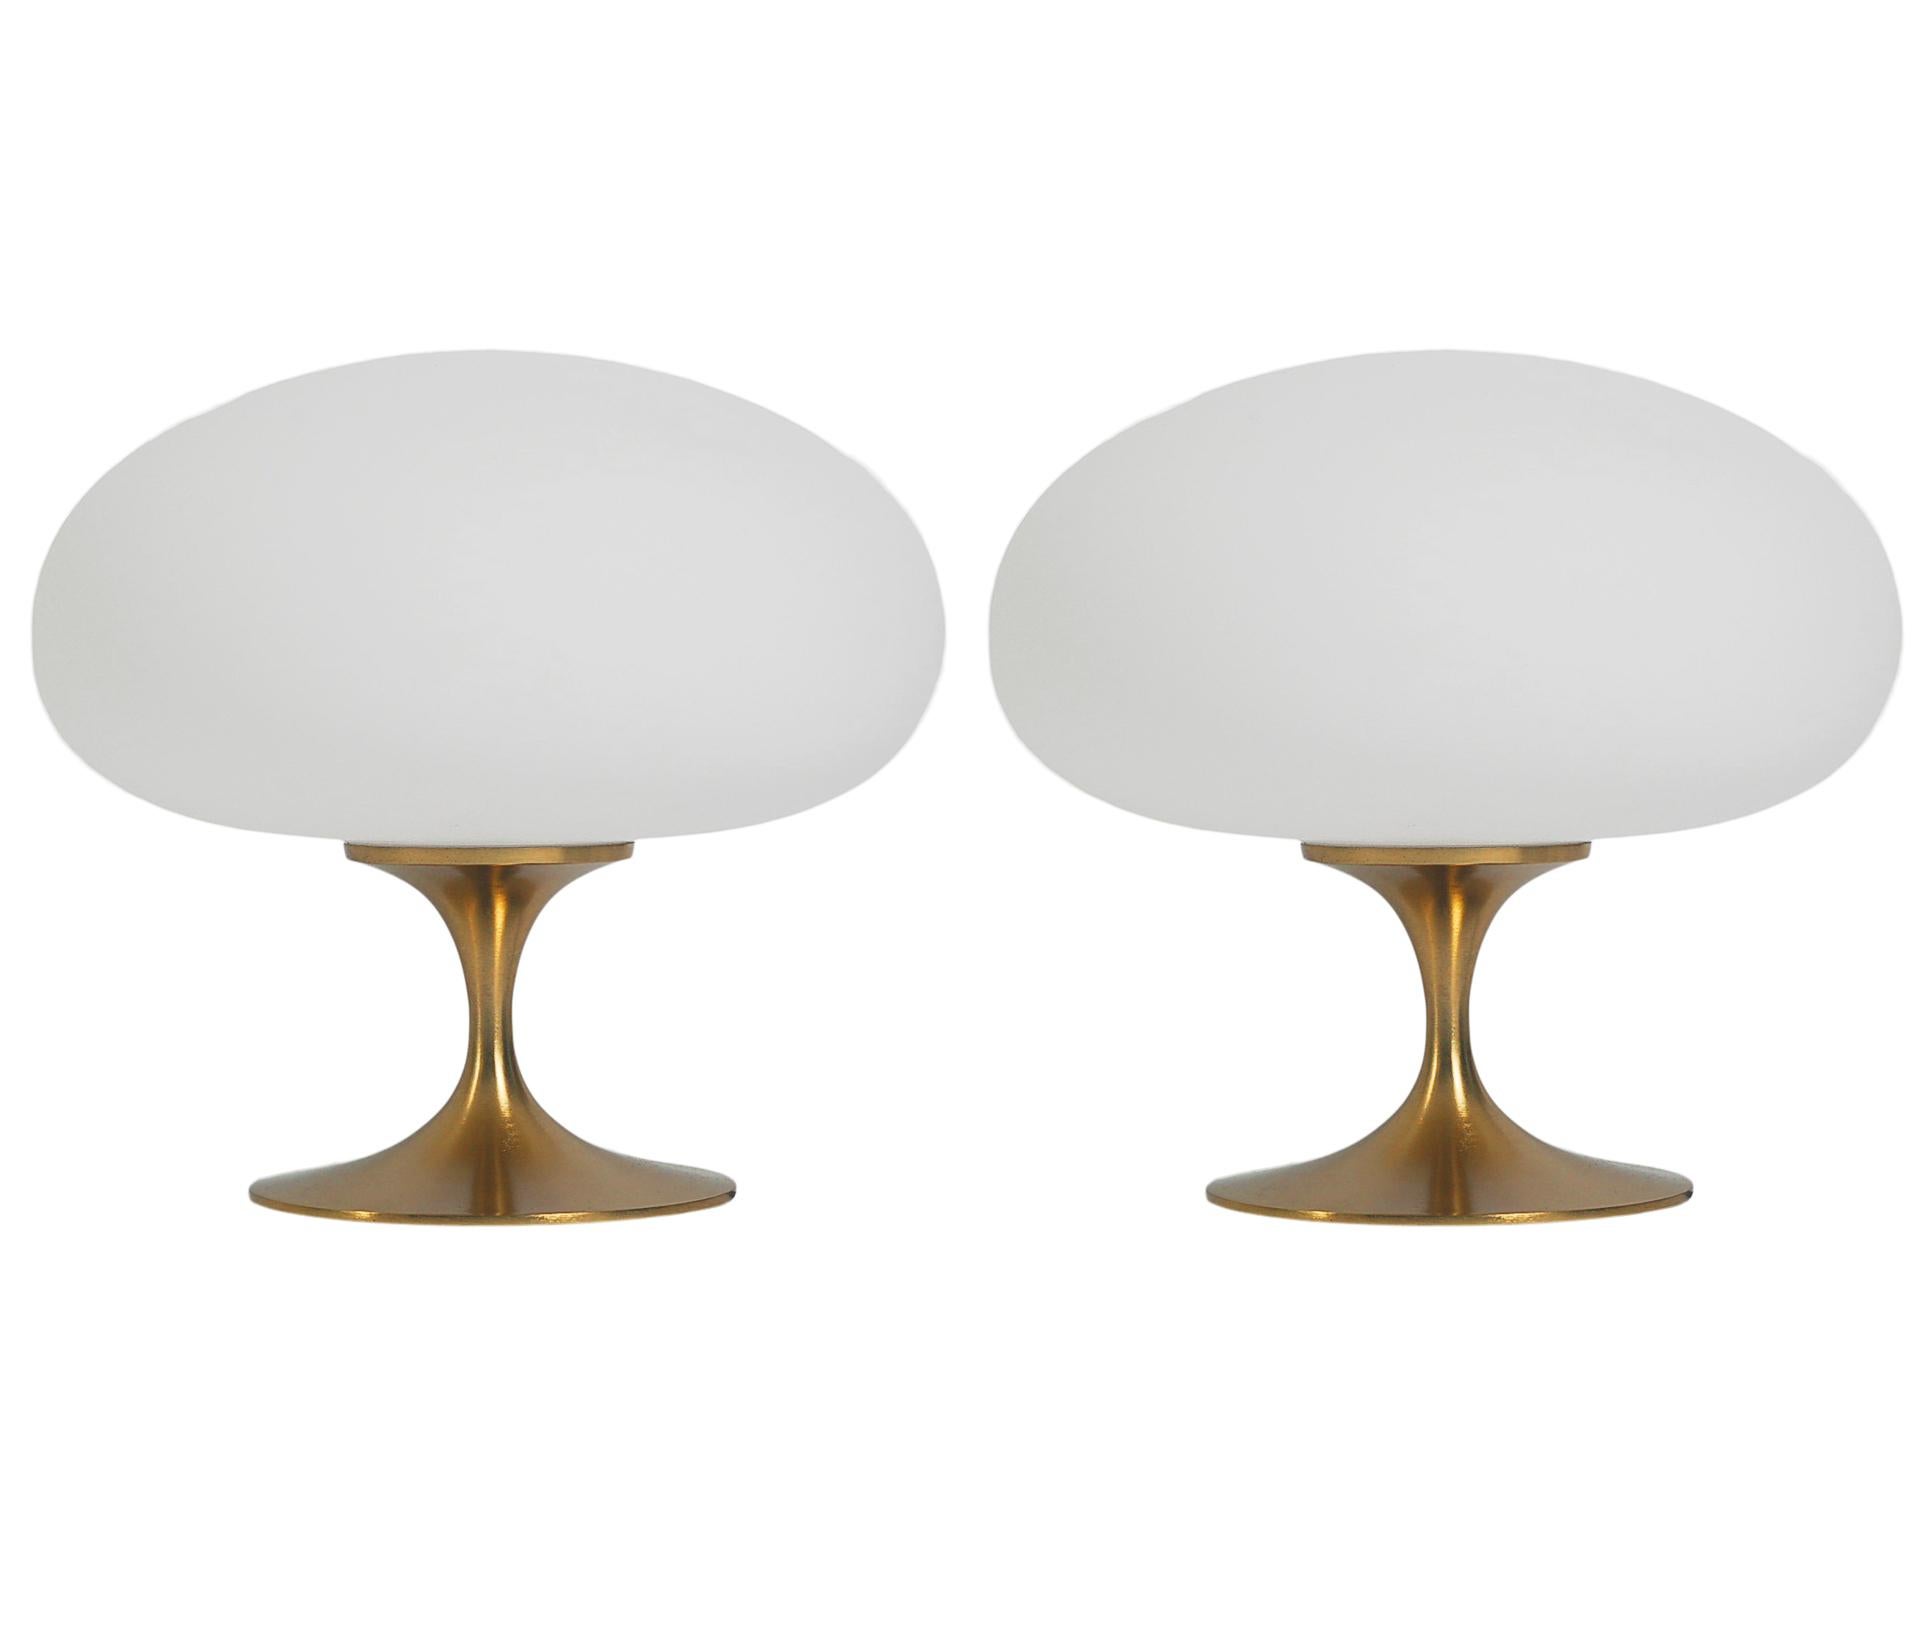 A gorgeous matching pair of Stemlite tulip form table lamps. These feature brass plated cast aluminum bases with mouth blown frosted white glass shades. The price includes the pair as shown.